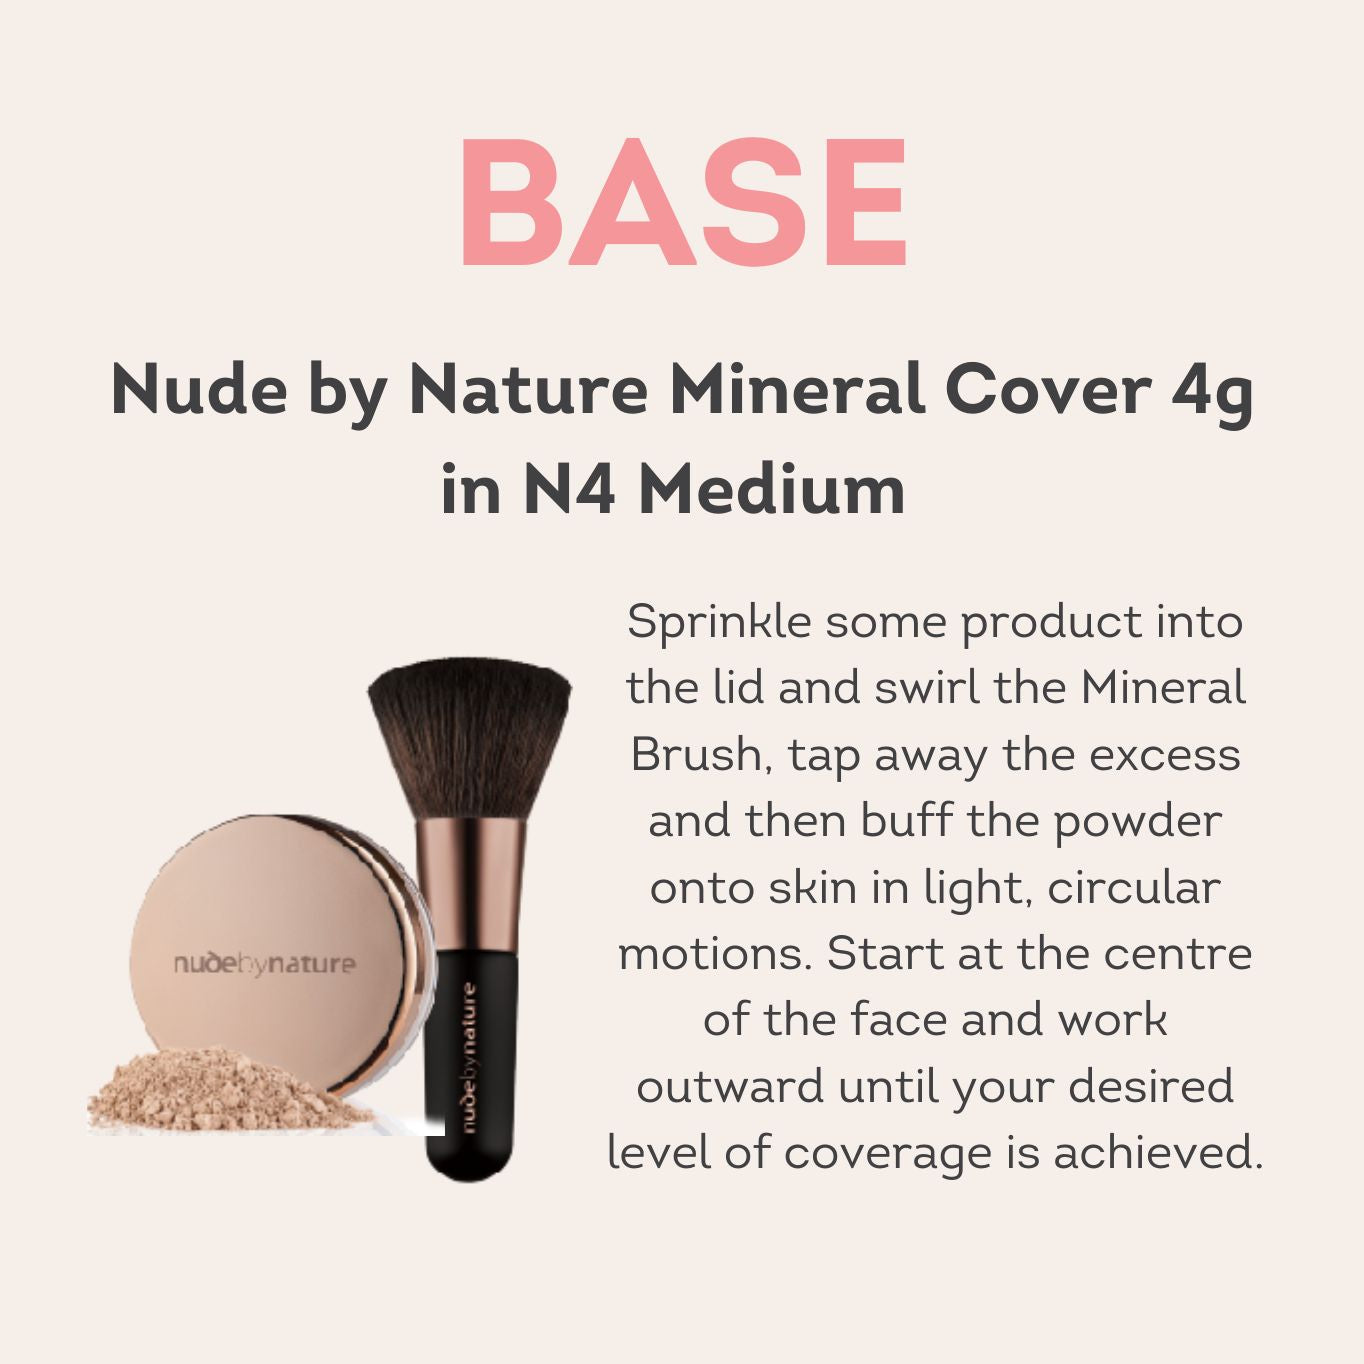 Nude by Nature Make-Up